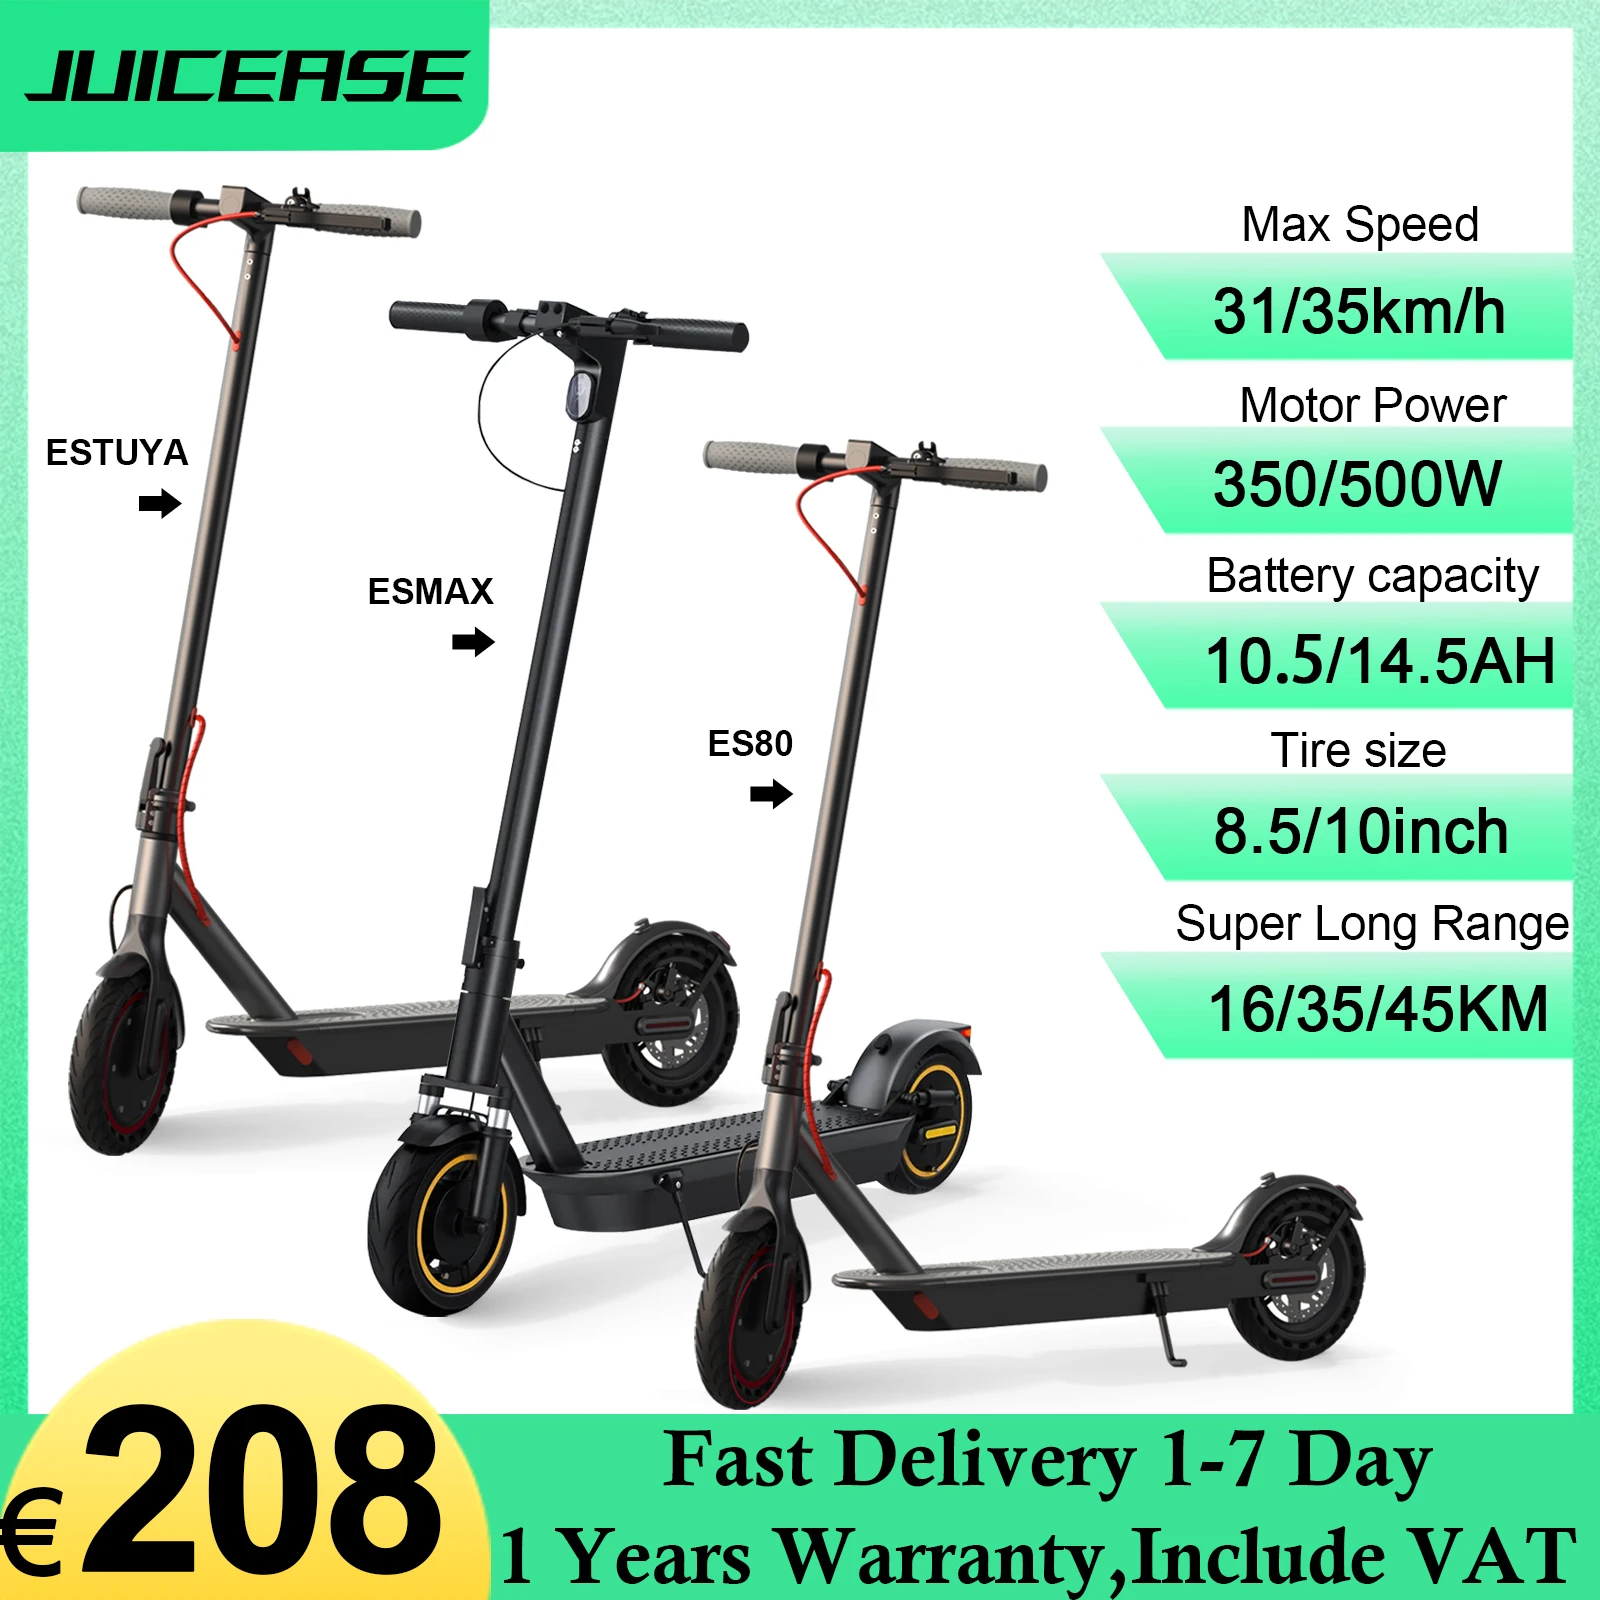 JUICEASE ESTUYA/ES80/ESMAX Electric Scooter For Adult 350/500W Motor E-scooter 35KM/H Max Speed 8.5/10inch Electric Kick Scooter